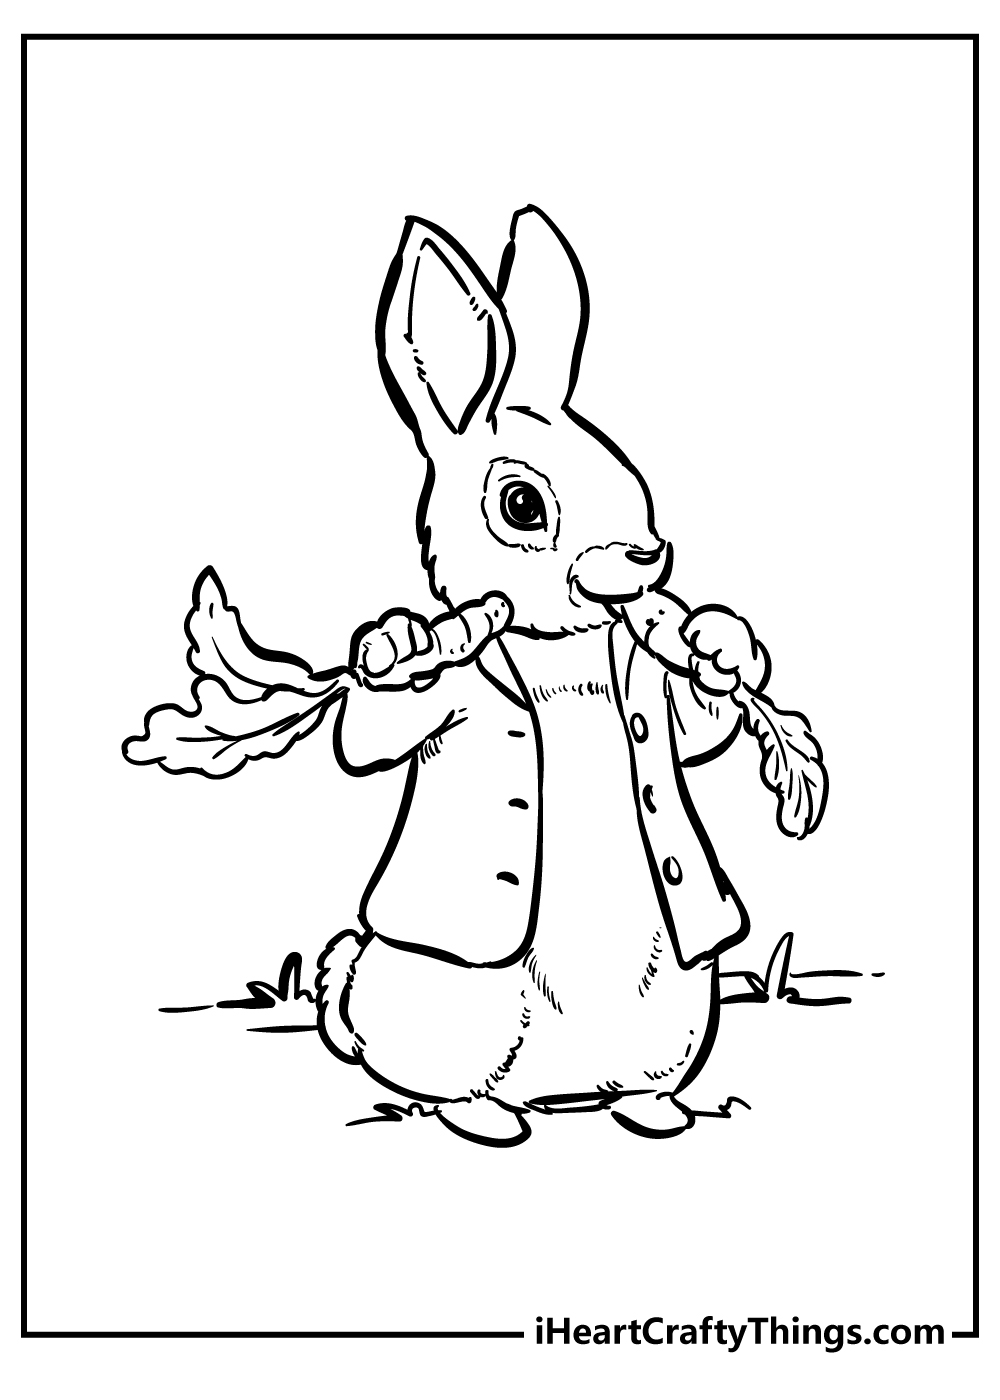 Peter Rabbit Coloring Sheet for children free download